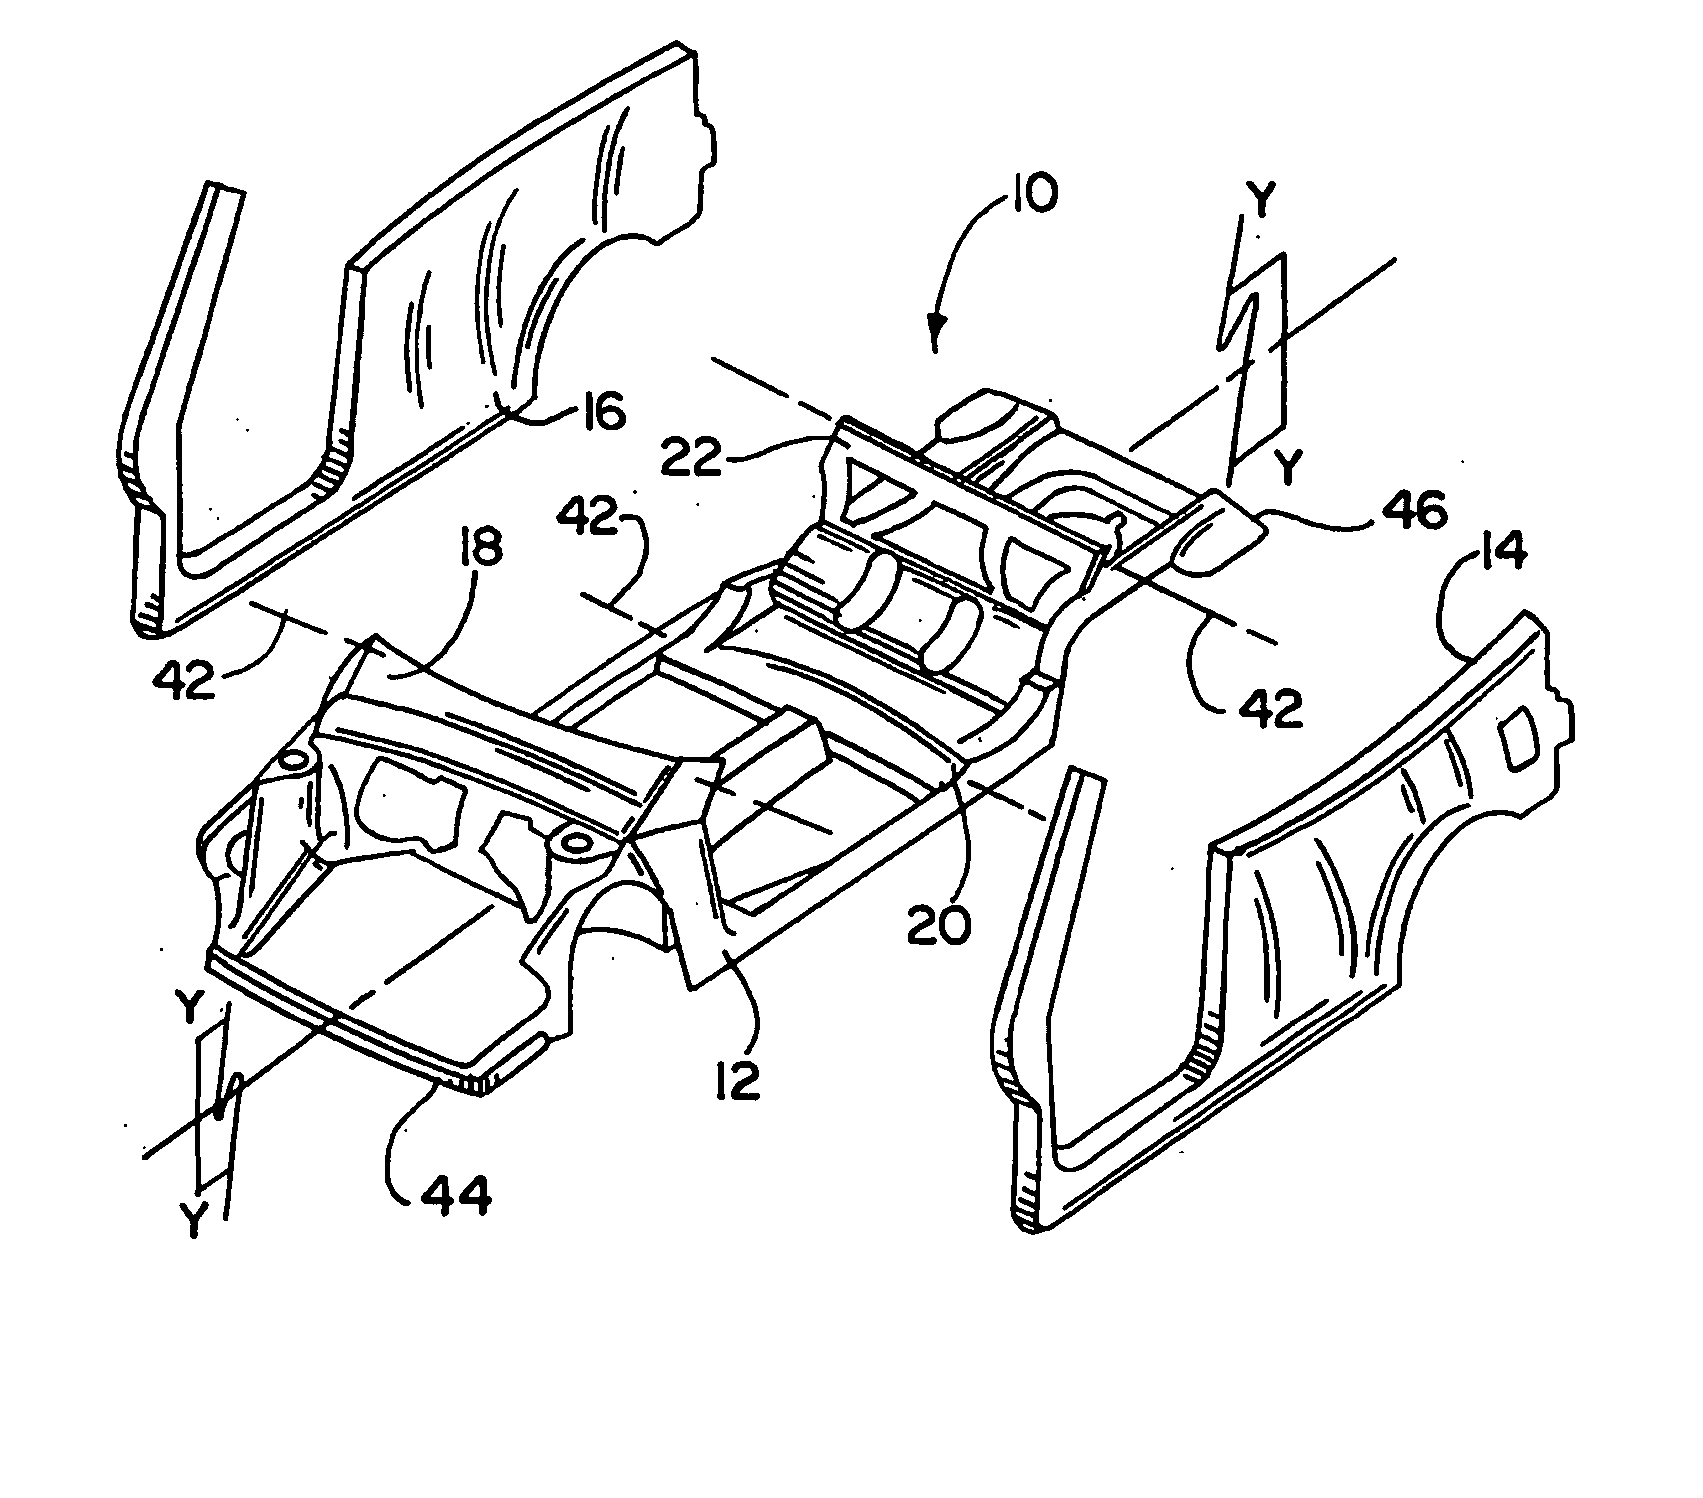 Convertible vehicle uni-body having and internal supplemental support structure